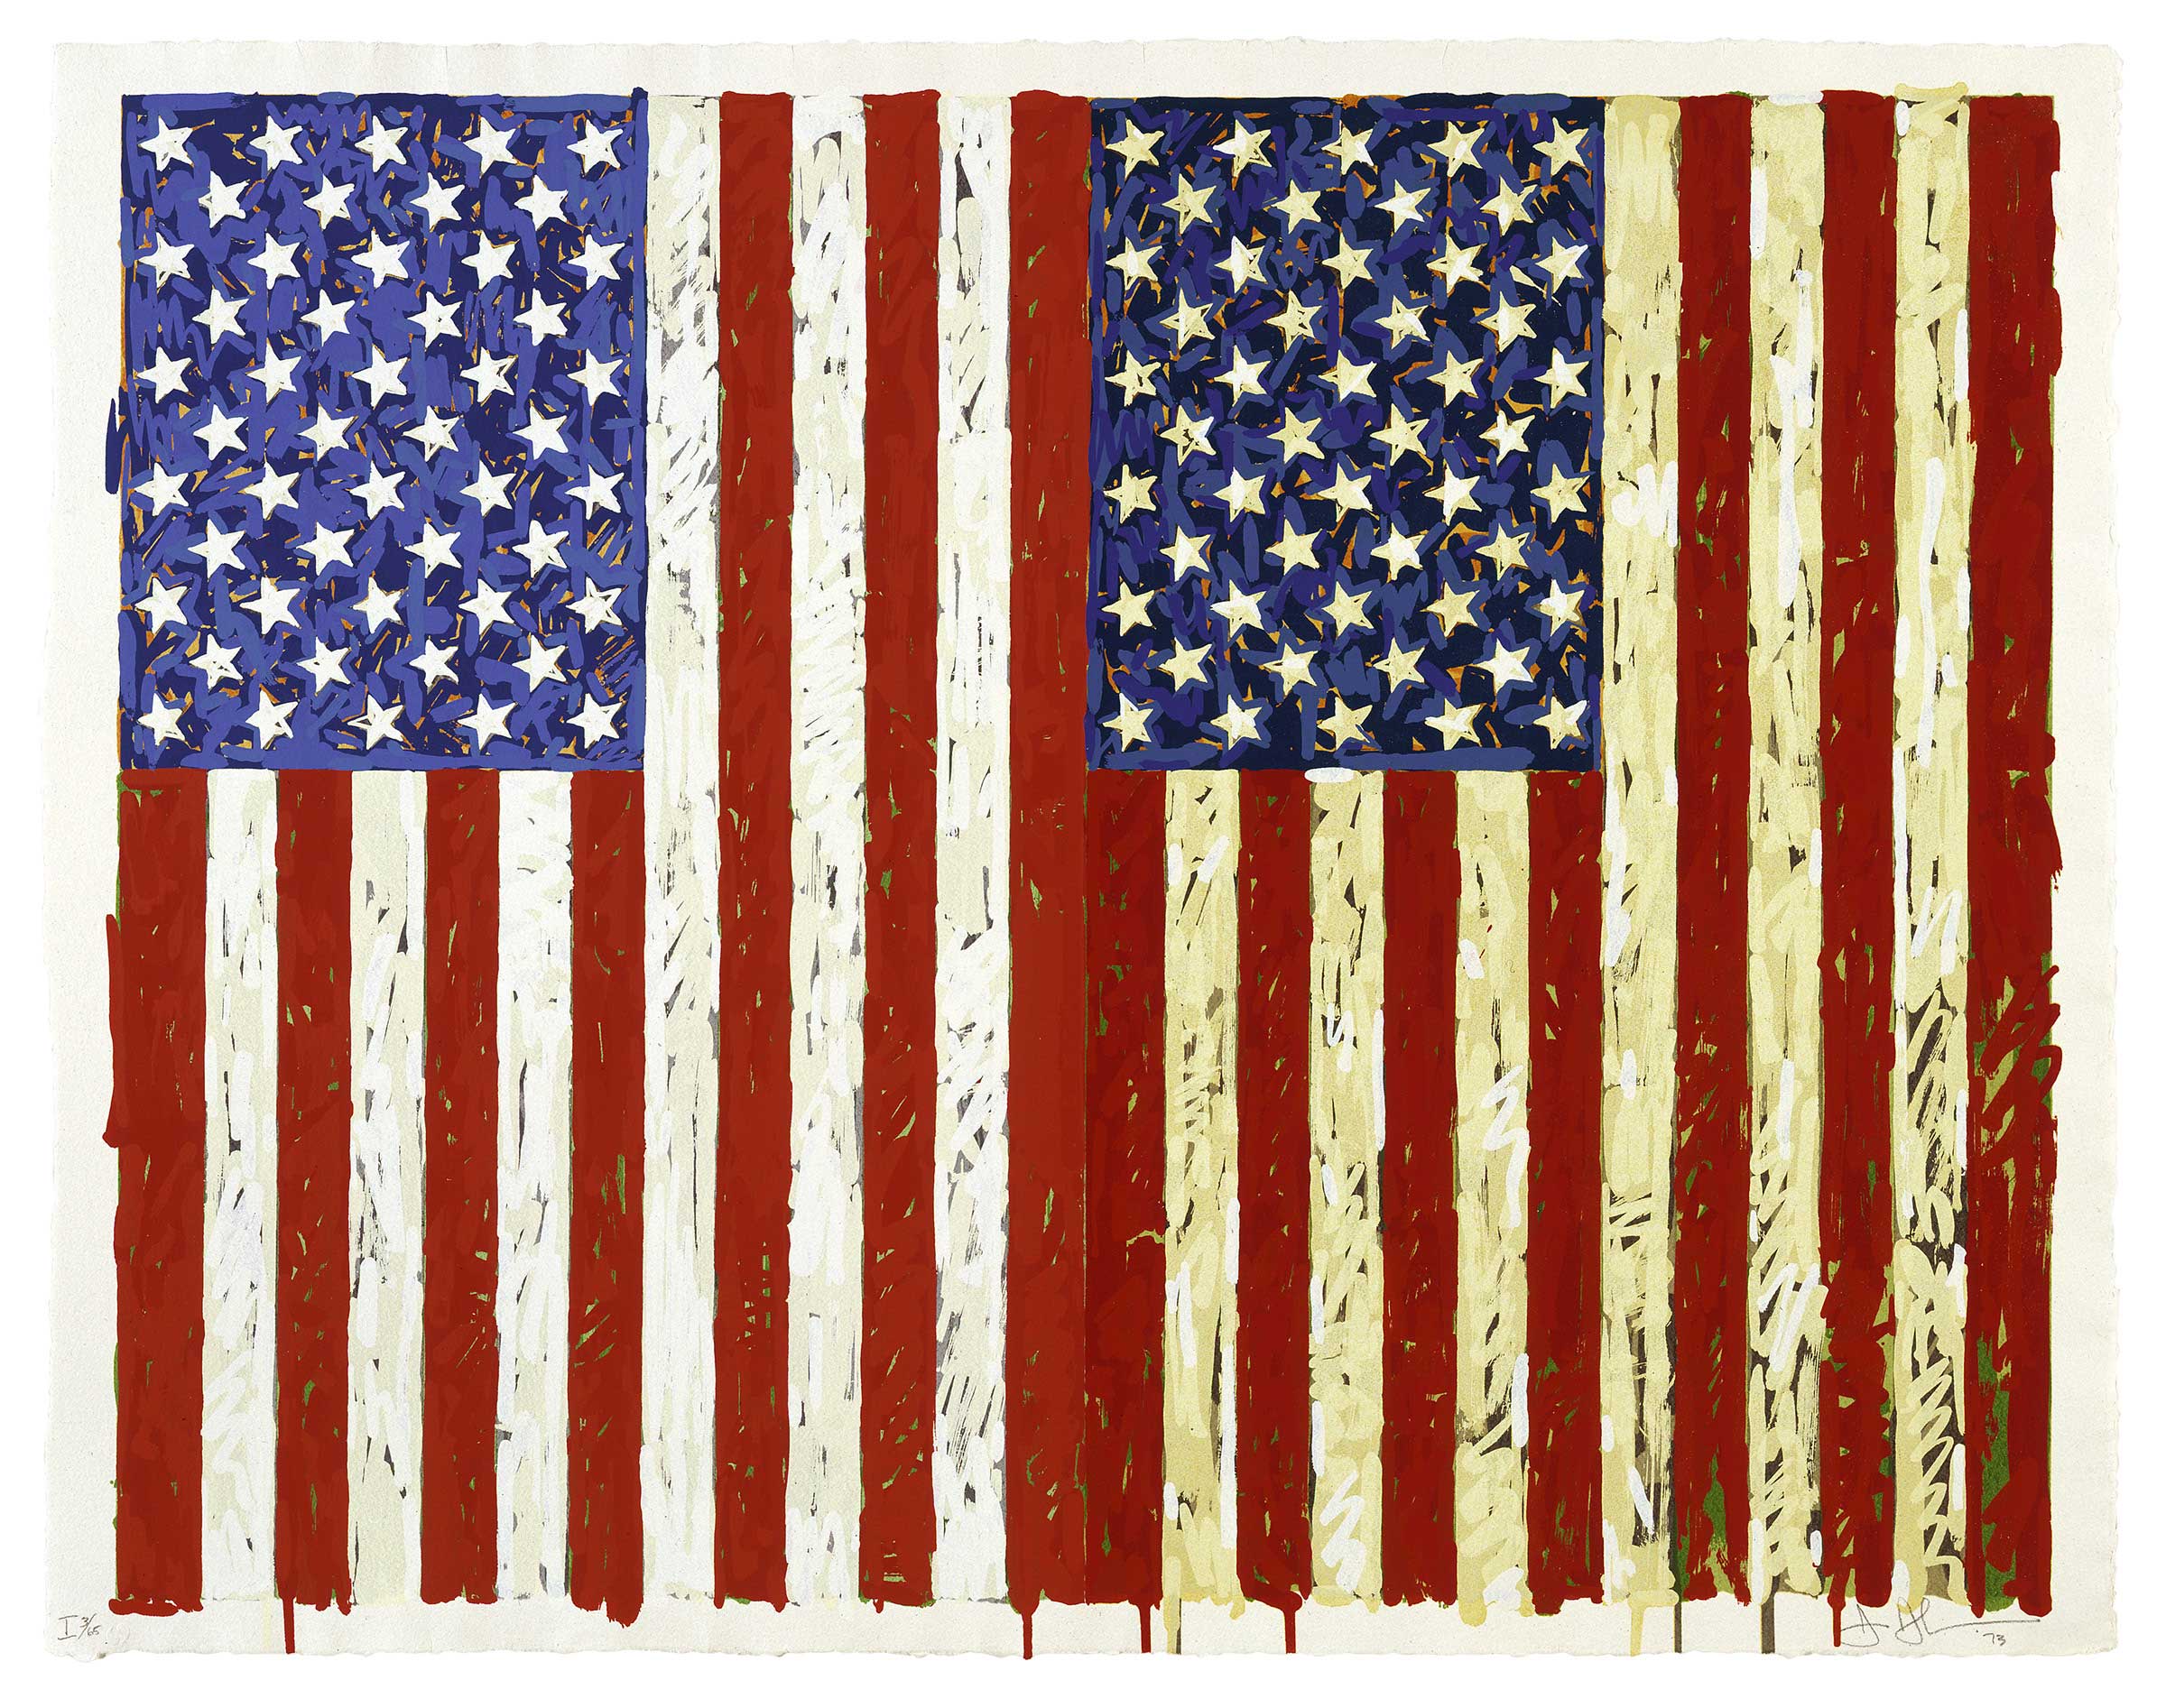 Two American Jasper Johns flags side by side, the left one brighter and cleaner, and the right one dingier and yellowed